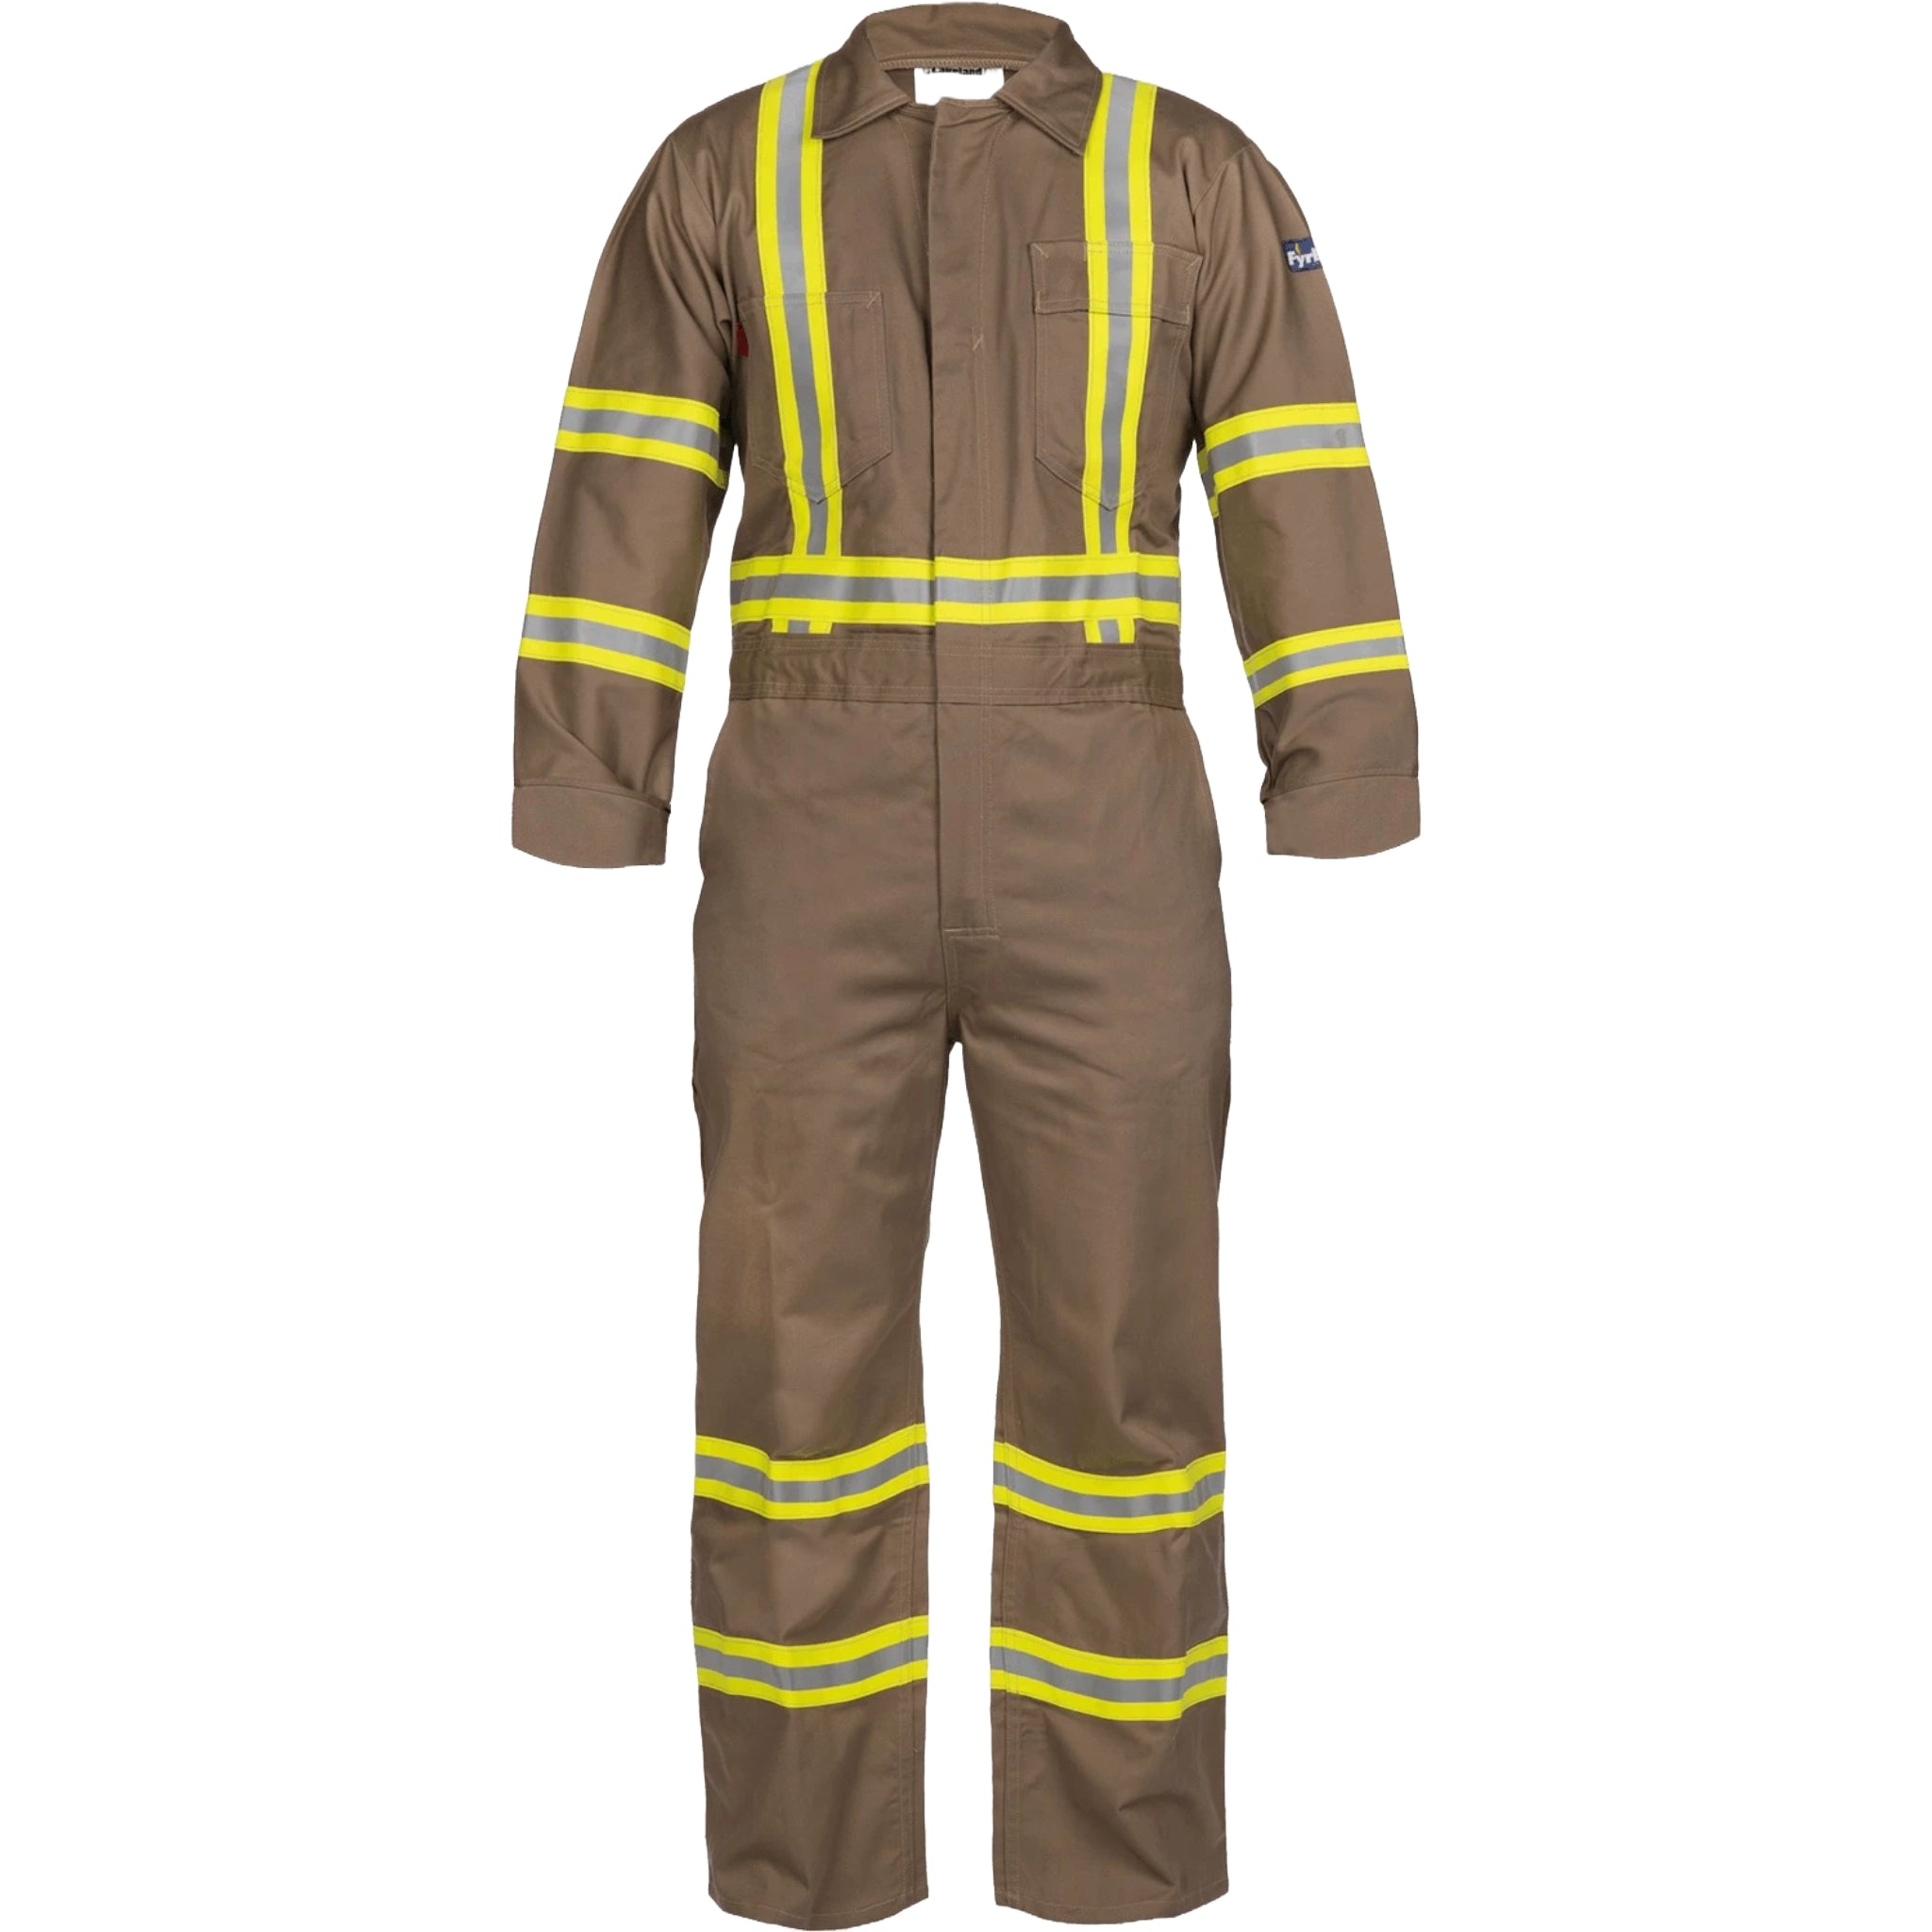 LAKELAND C081RT20 Coverall 100% FR Cotton 9oz, Tan with Reflective, 1 Each